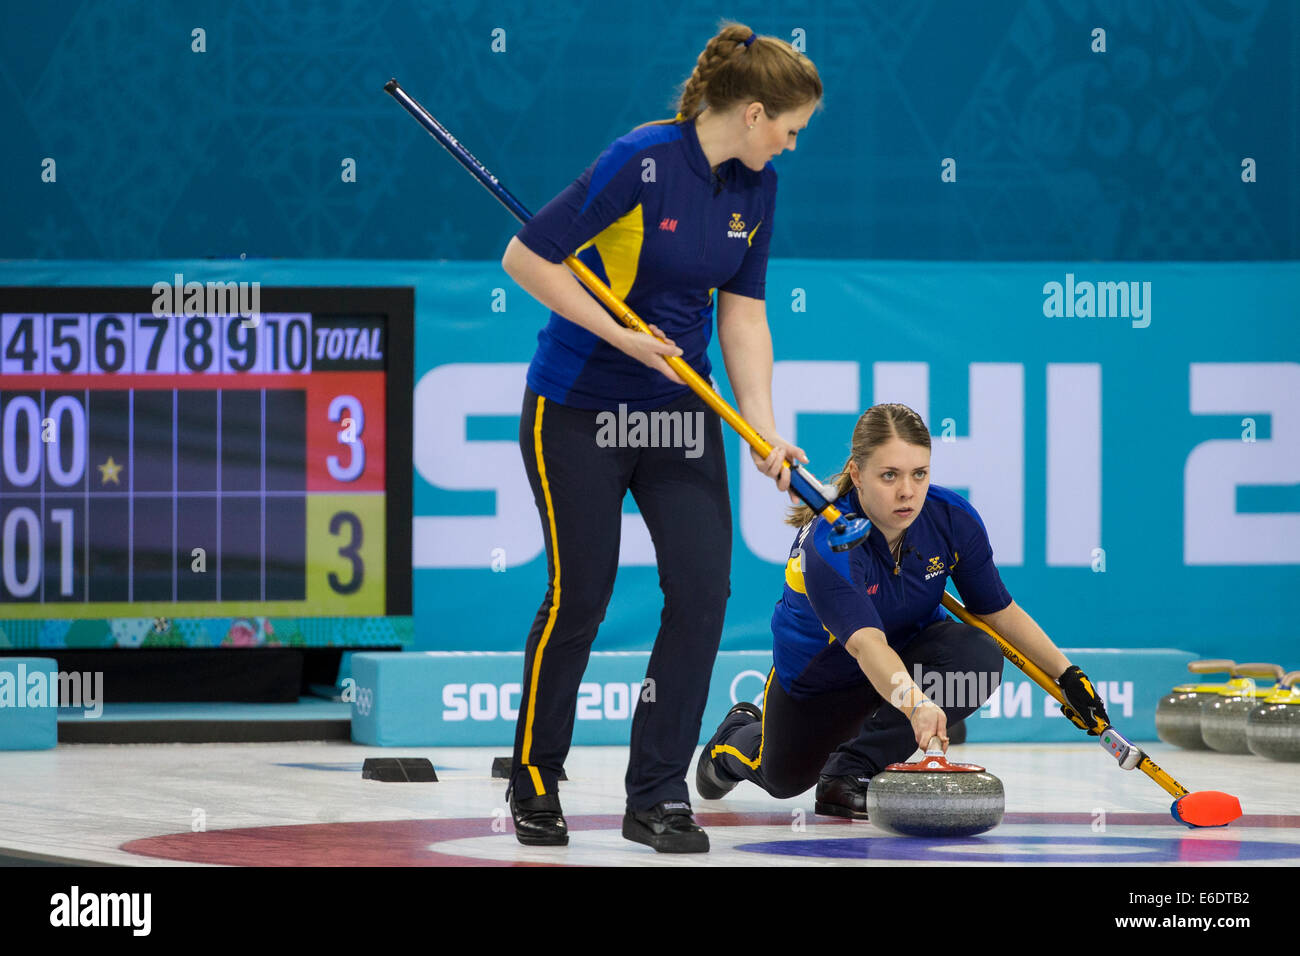 Maria Wennerstroem plays a stone with (Christina Bertrup sweeping  of Team Sweden during  Women's curling competition at the Oly Stock Photo